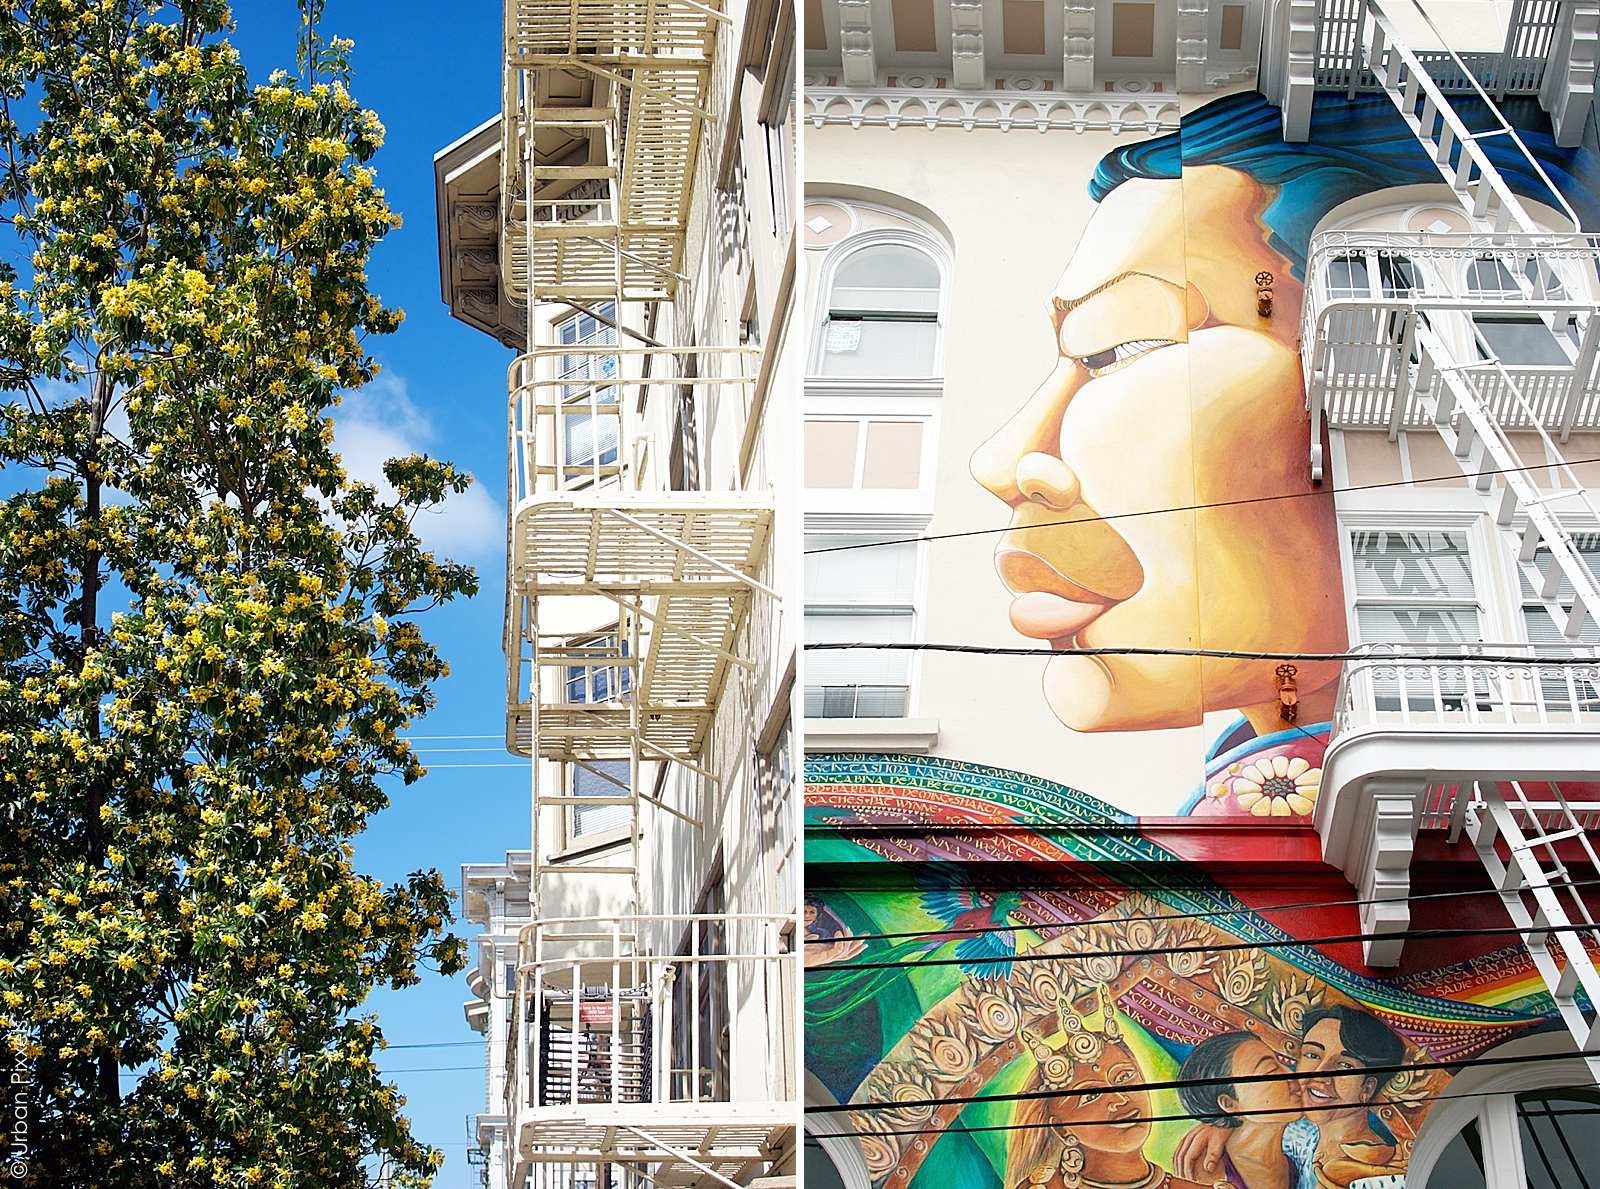 Murals in The Mission in San Francisco